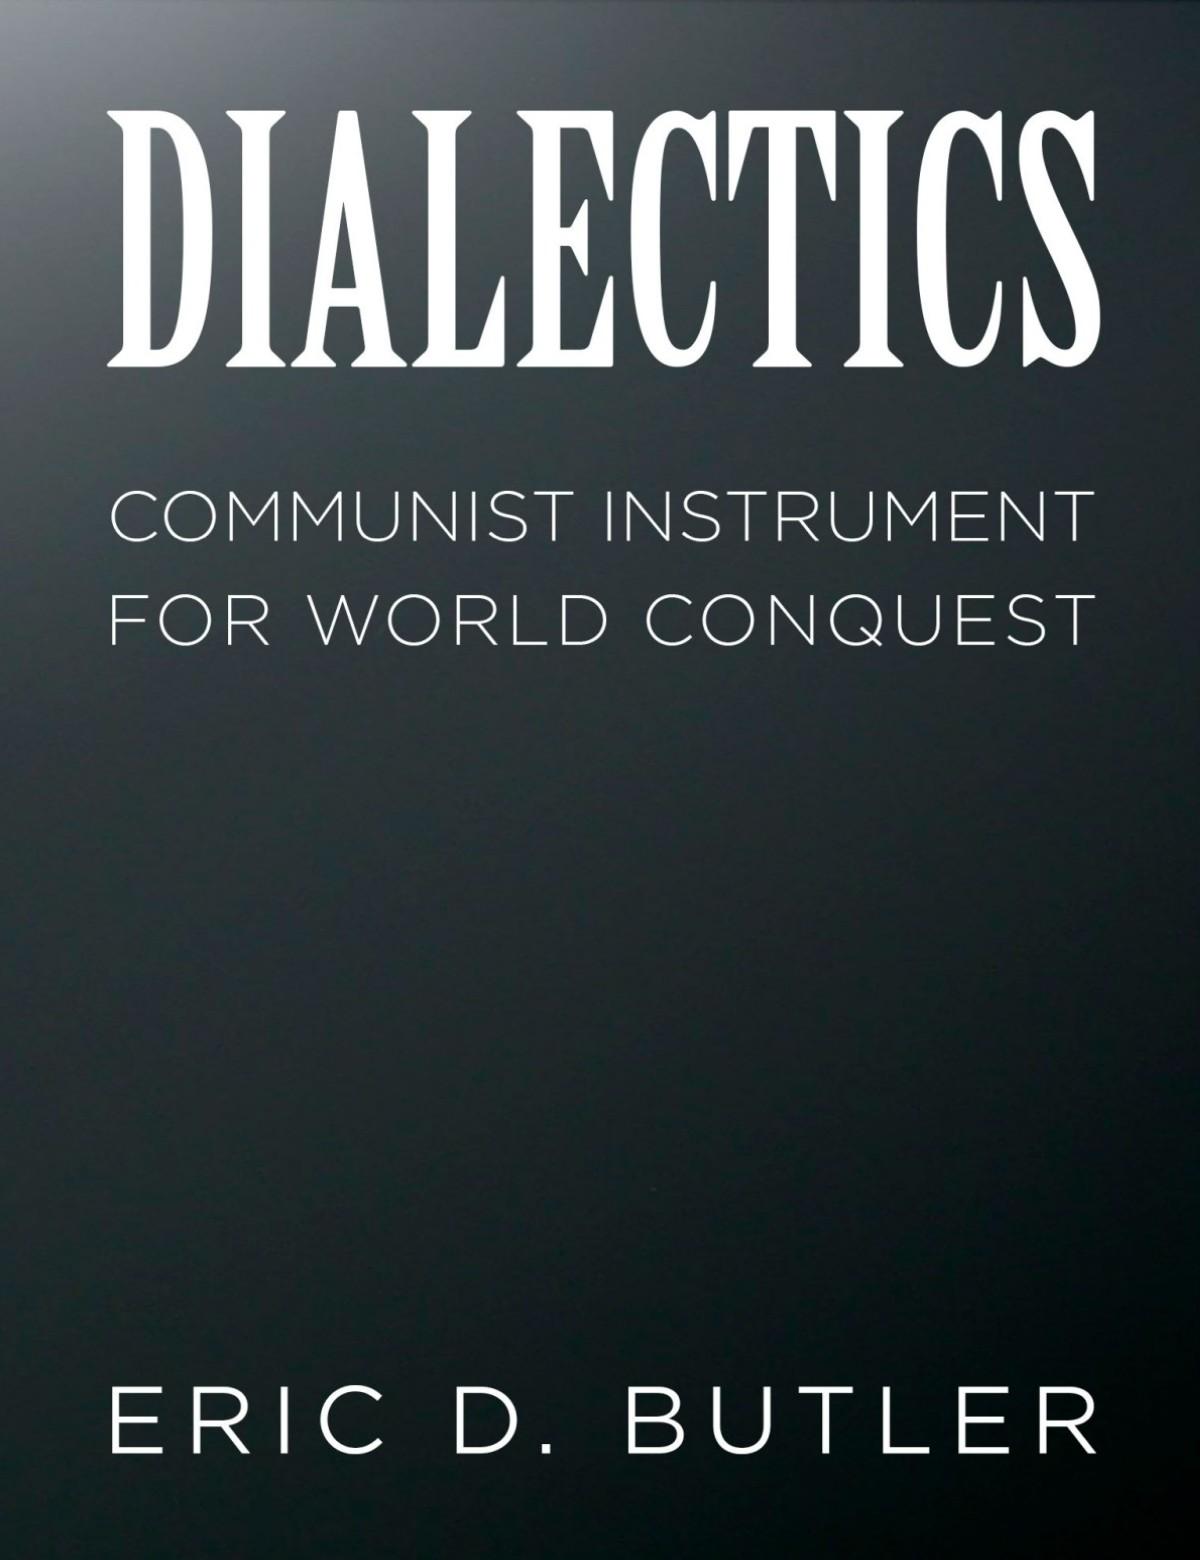 Dialectics - Communist Instrument for World Conquest (1980) by Eric D. Butler